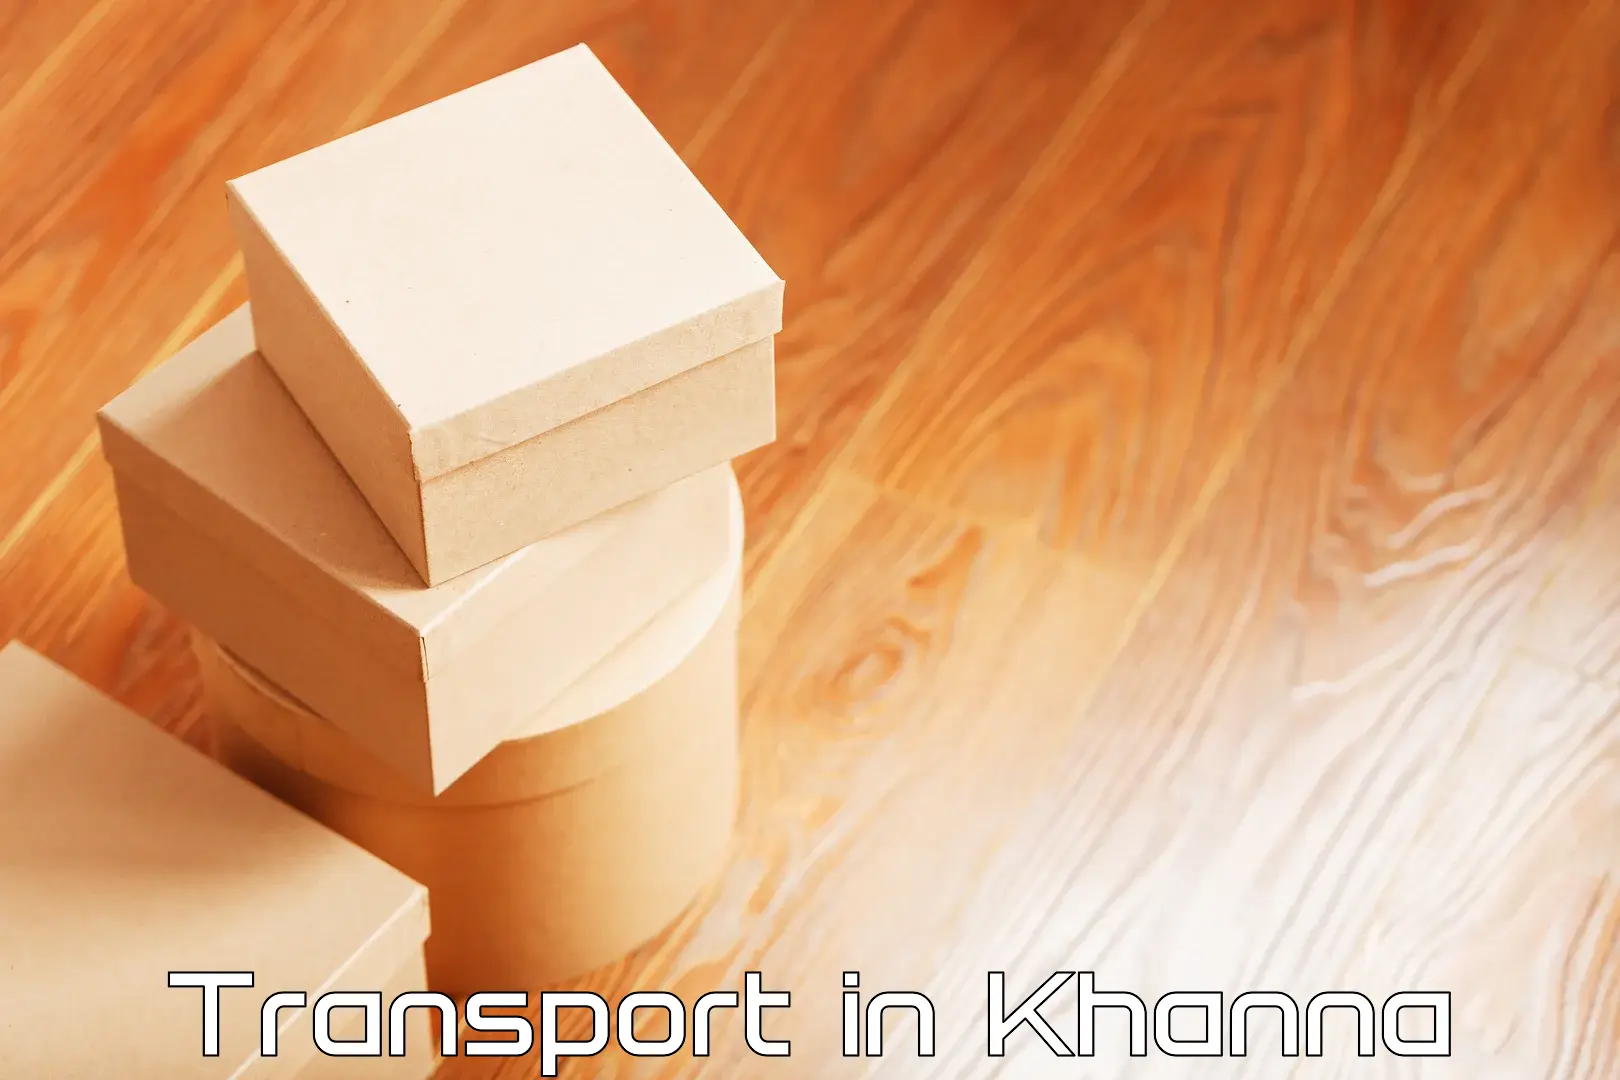 Road transport services in Khanna